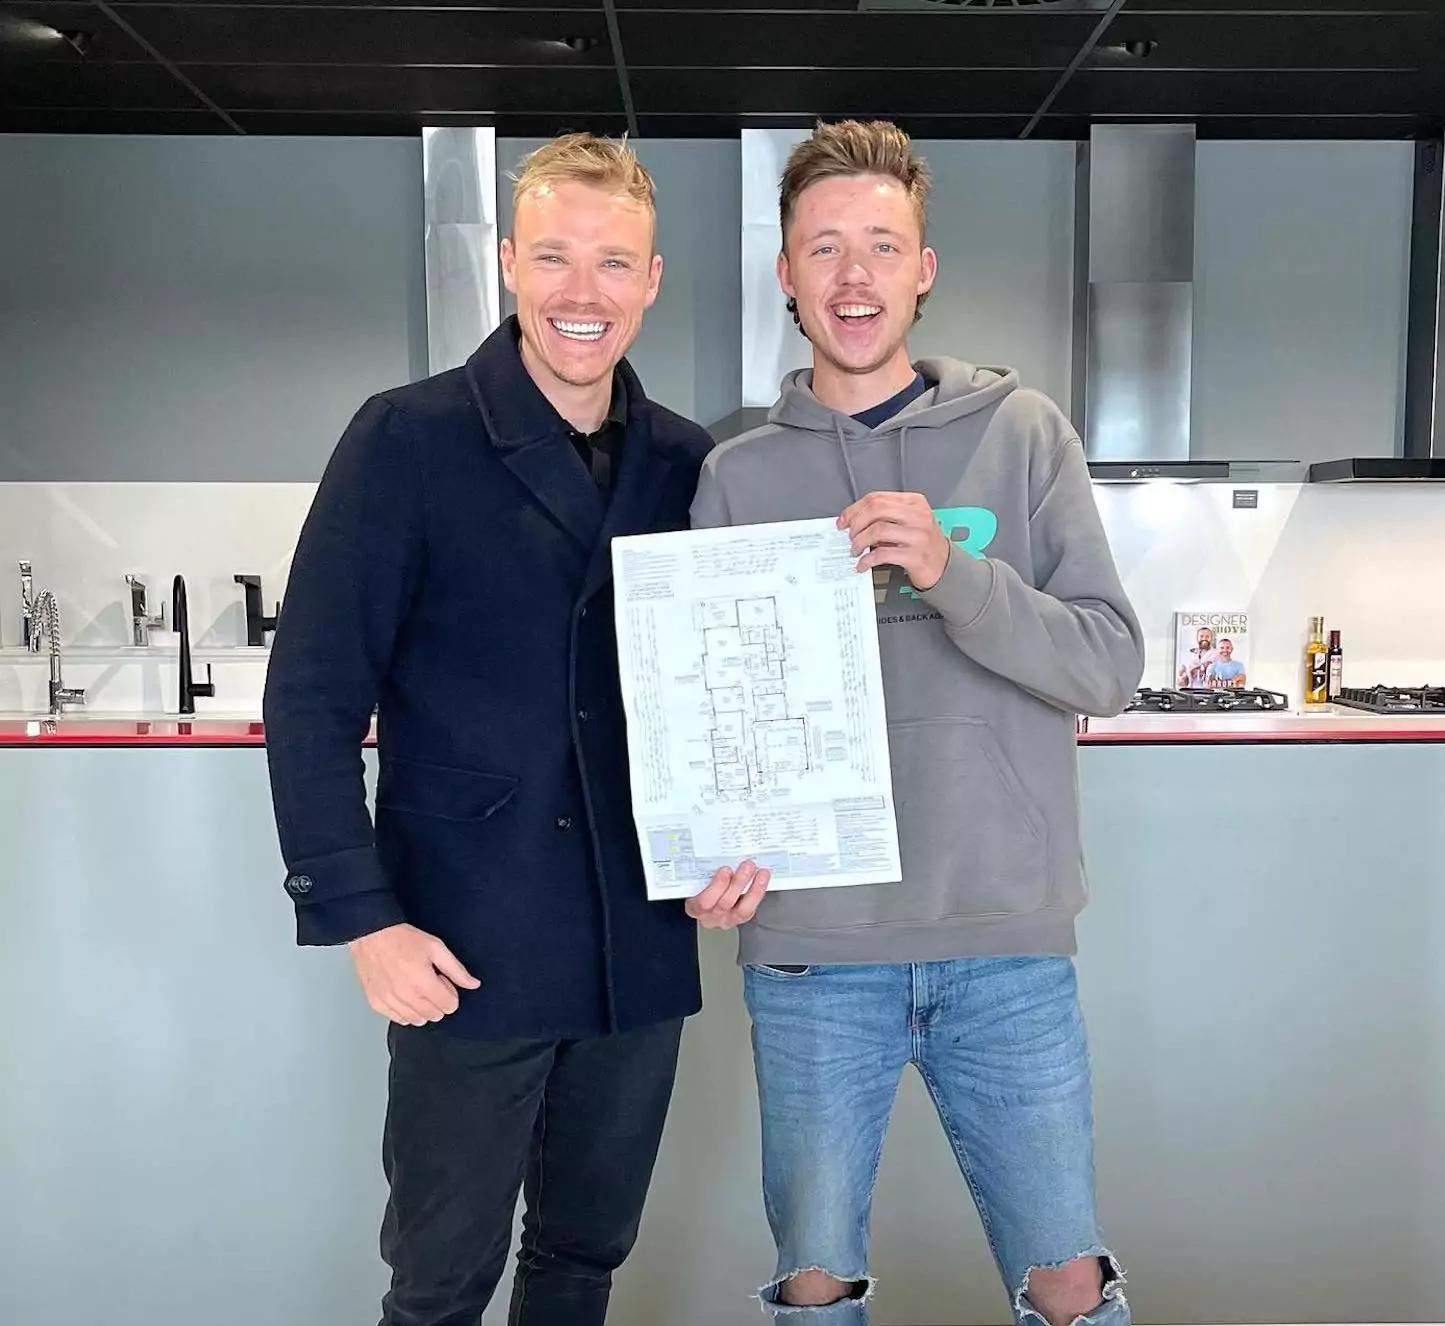 Jack Thornton with a male first home buyer smiling holding up a floorplan